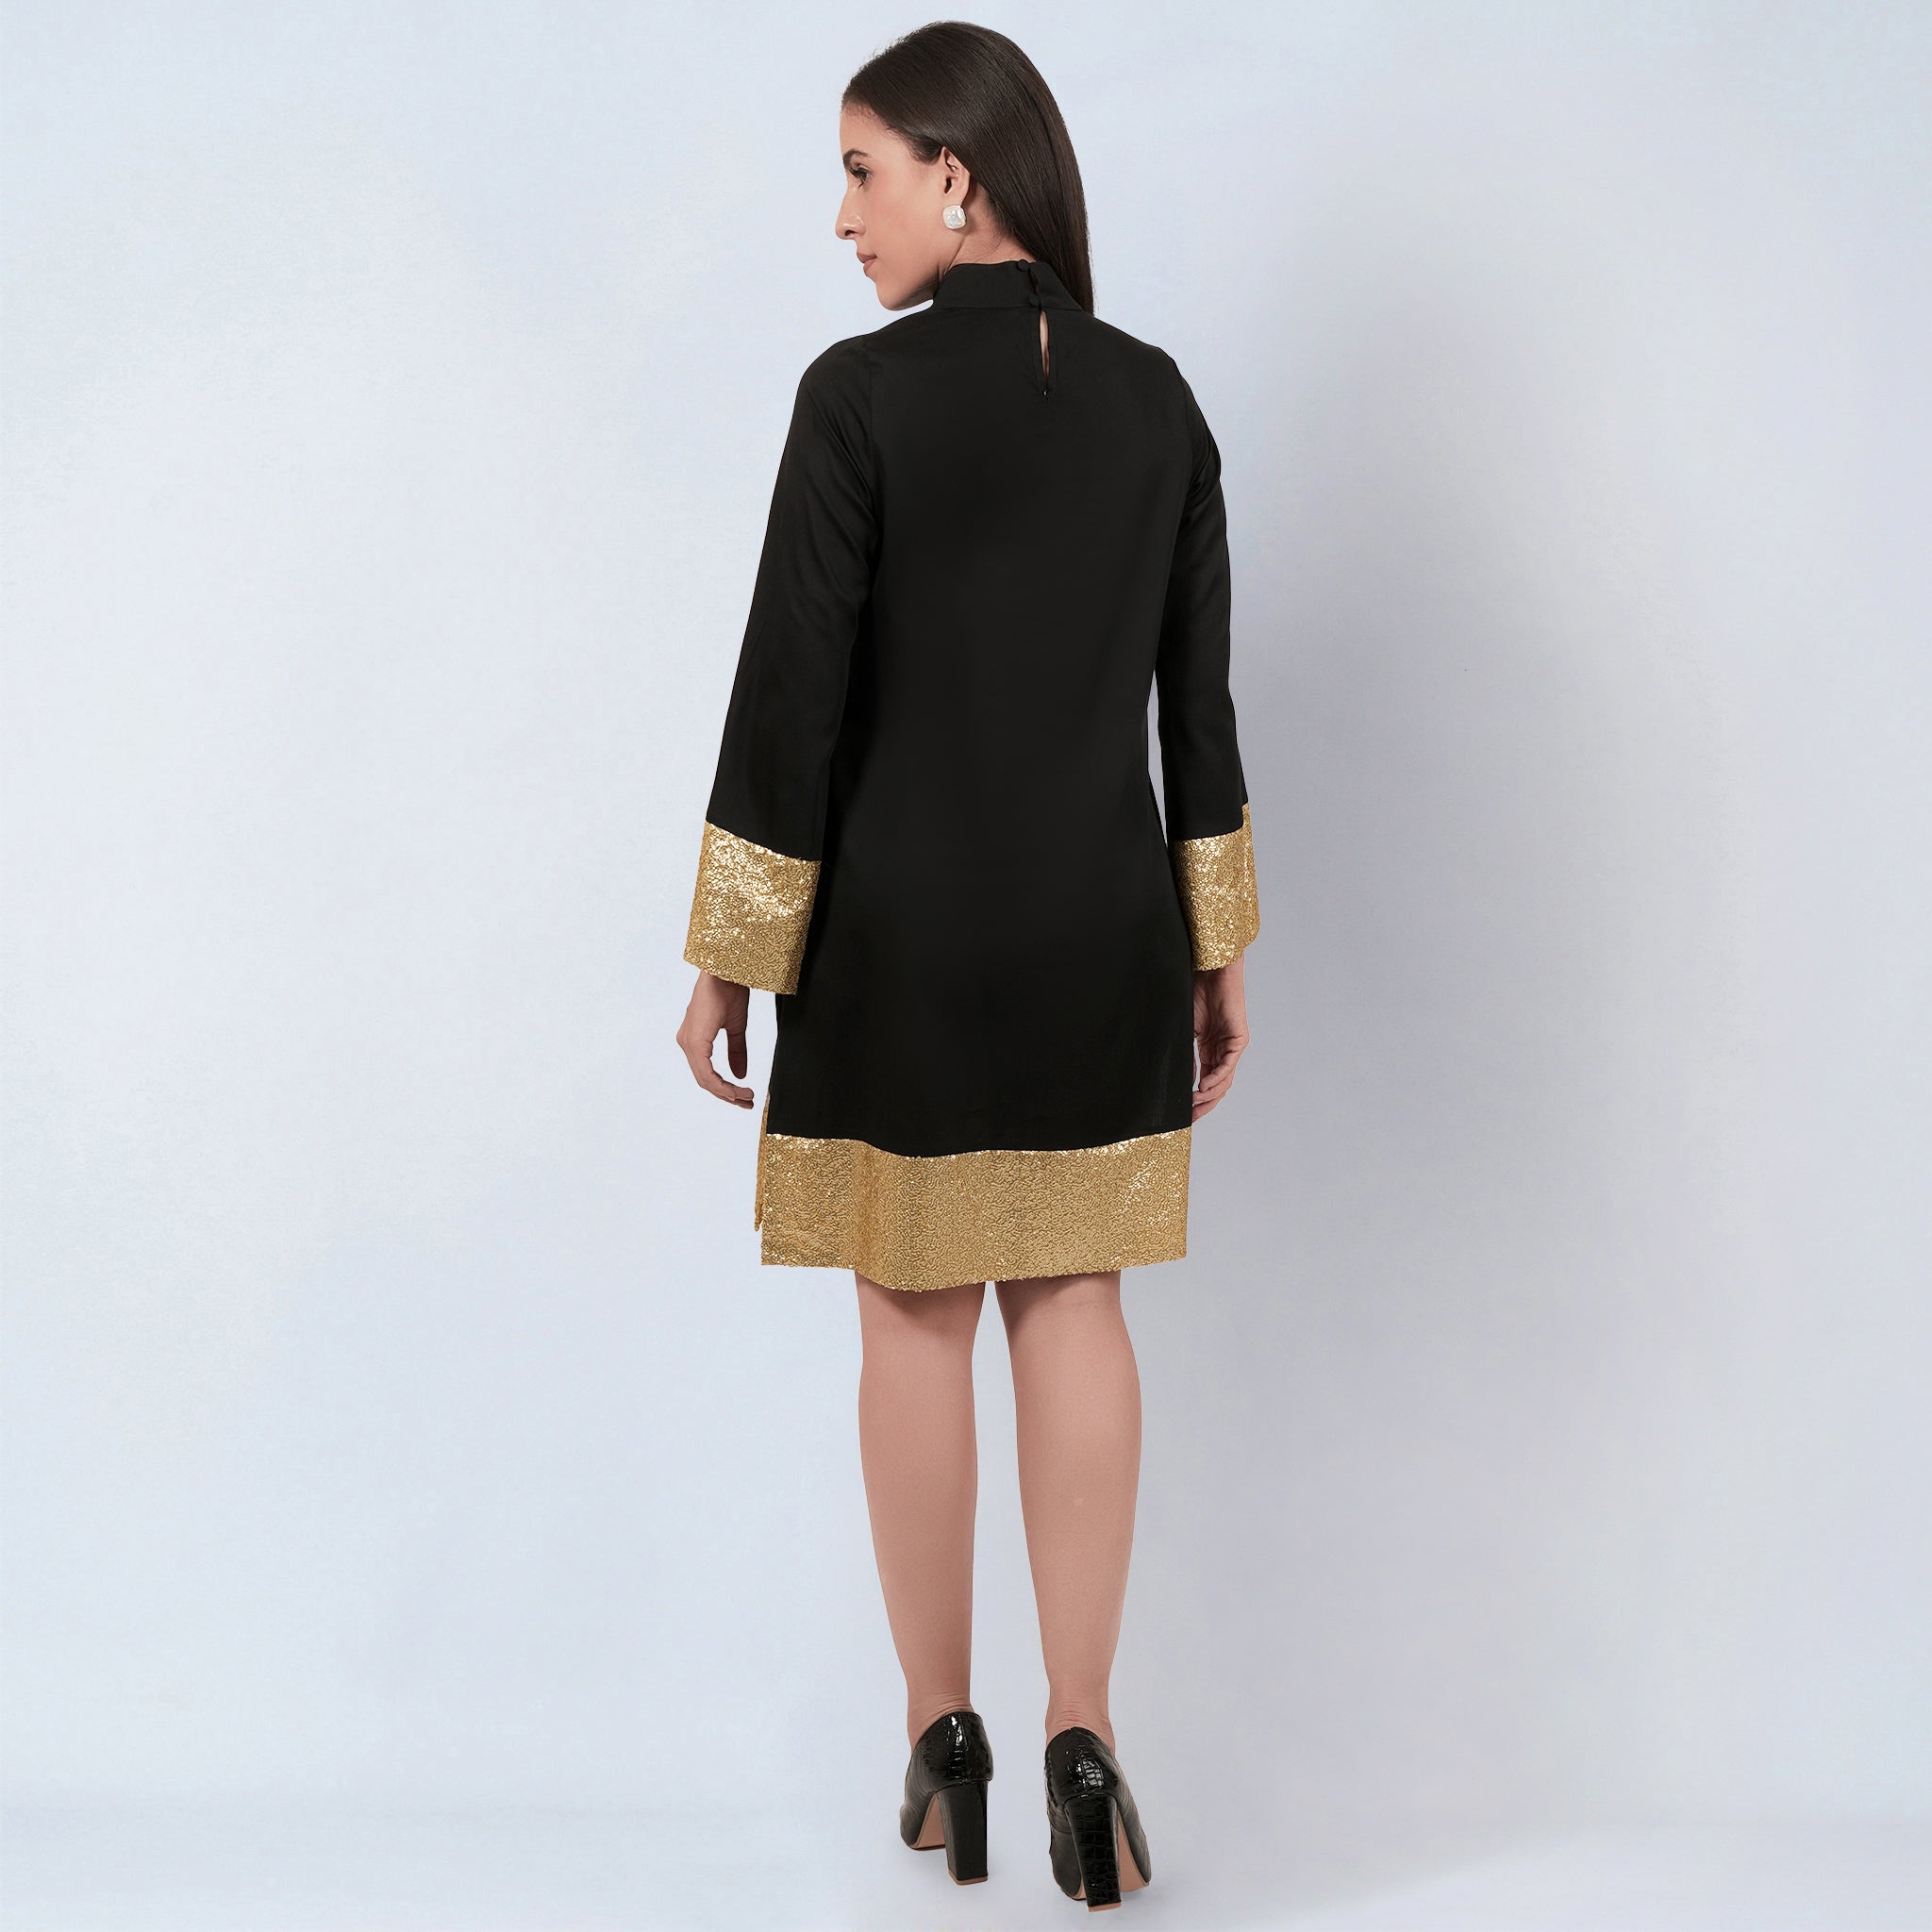 Black Cotton Satin Tunic Dress with Gold Sequin Border